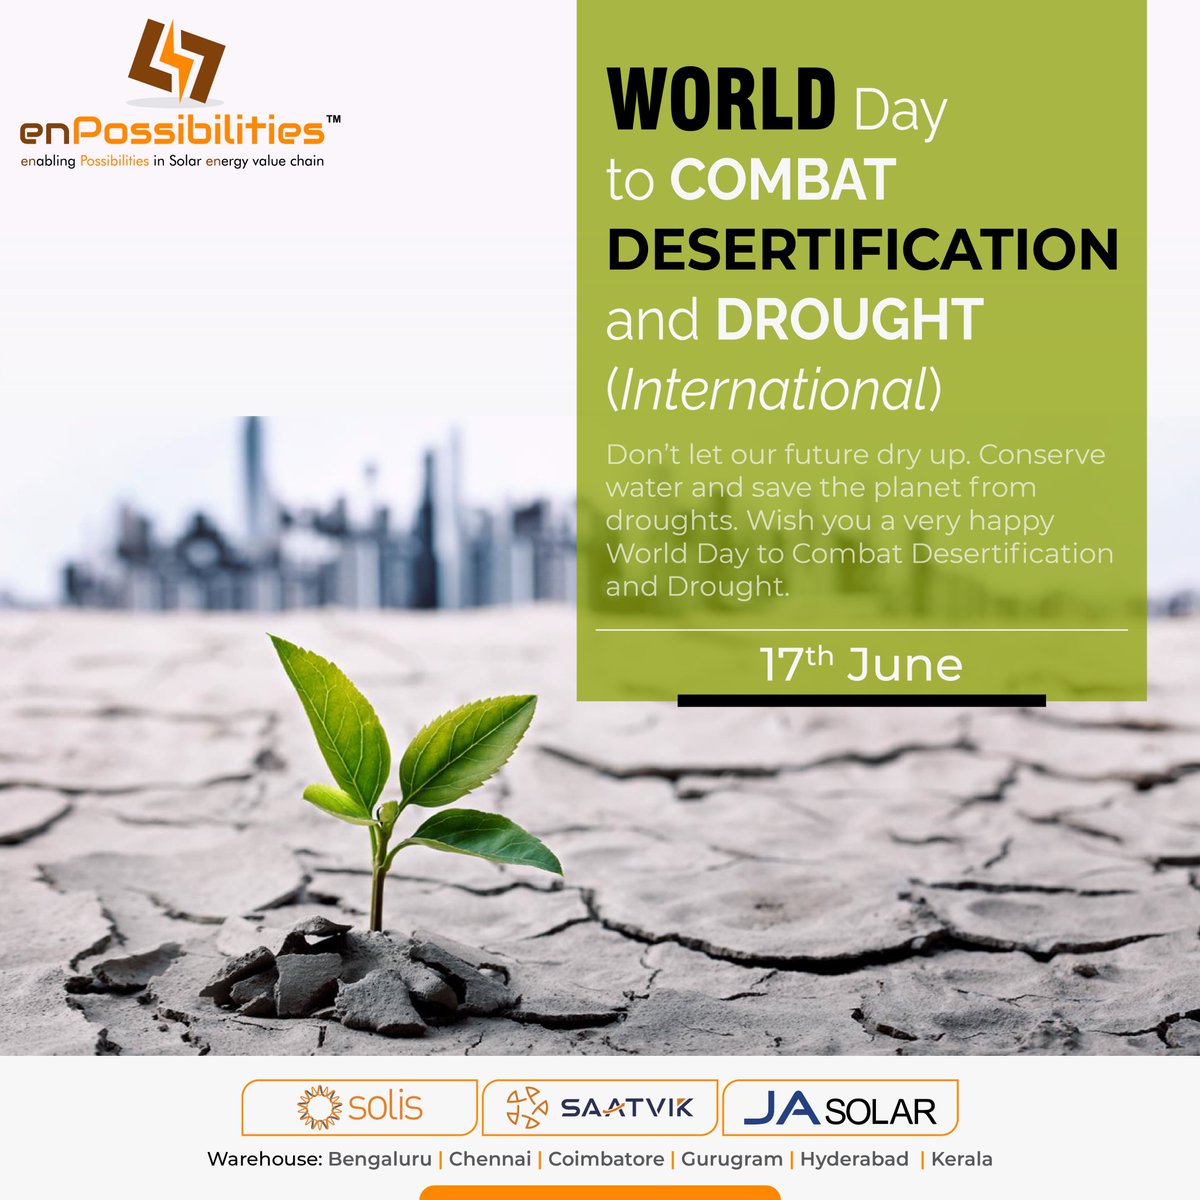 Don't let our future dry up. 💦 Conserve water and save the planet from droughts. Wish you a very Happy World Day to Combat Desertification and Drought. 🌊

#water #happyworldday #savewater #enpossibilities #solis #saatvik #jasolar #saynotopolution #desertification